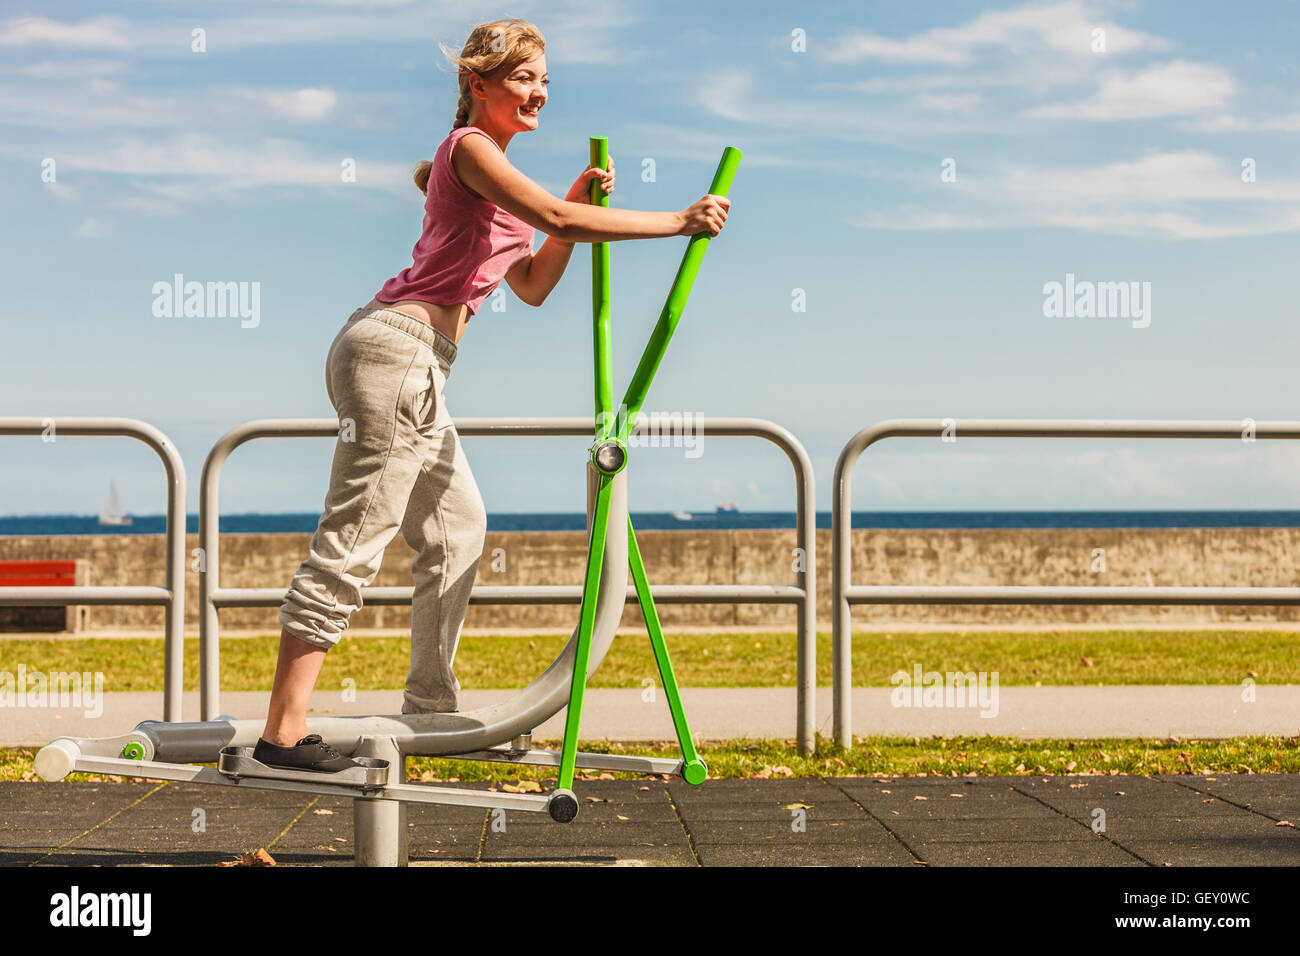 Active young woman exercising on elliptical trainer machine. Fit sporty girl in training suit working out at outdoor gym. Sport Stock Photo